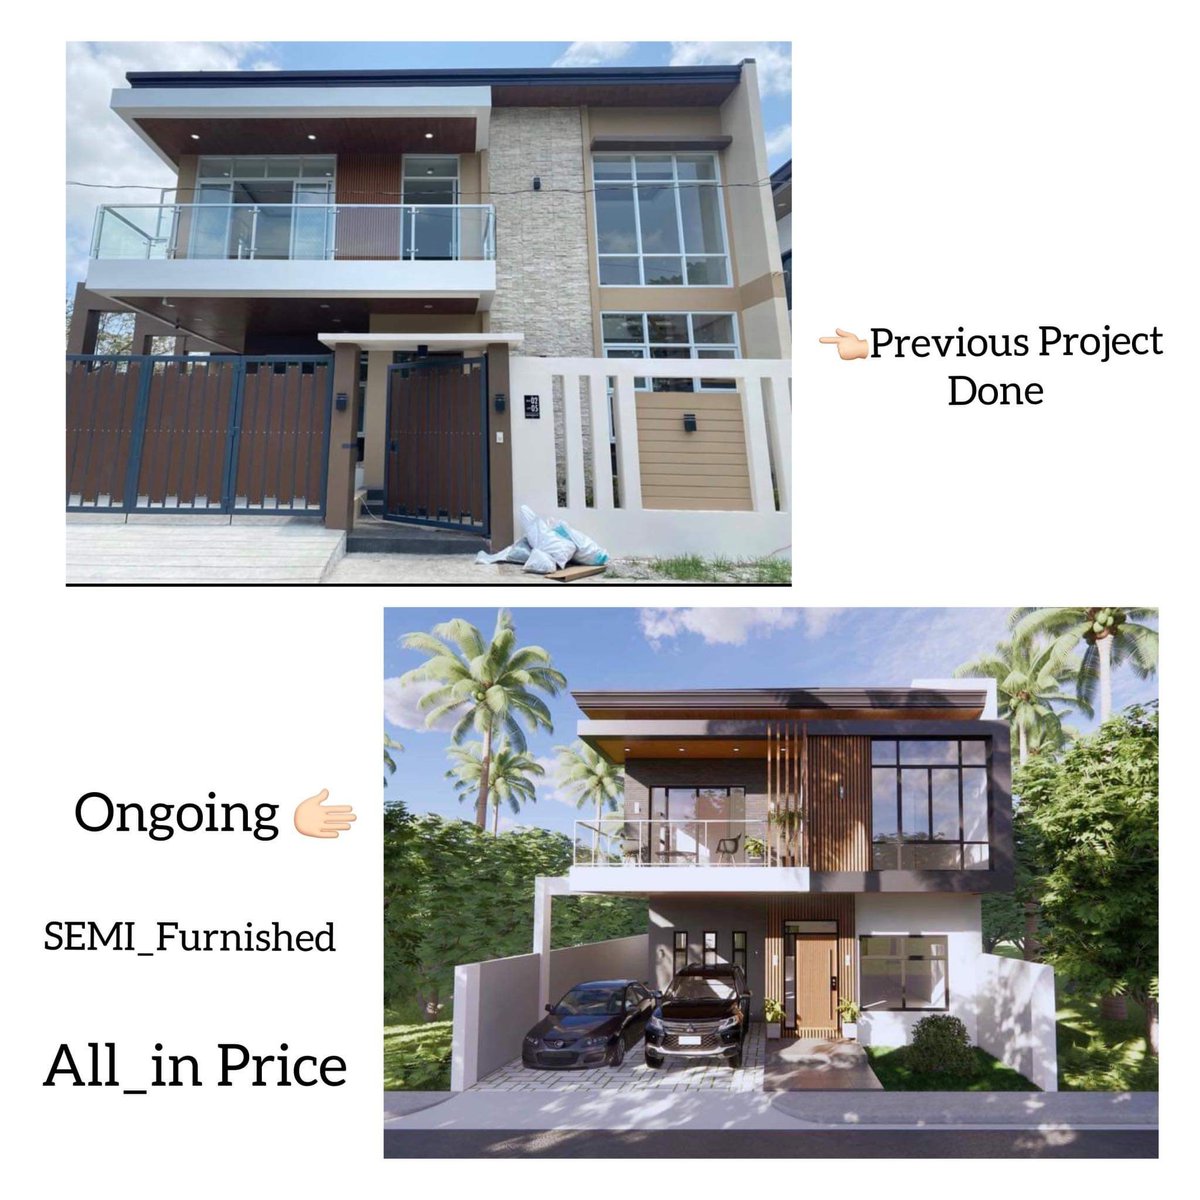 5-bedroom Single Attached House For Sale in Taytay Rizal